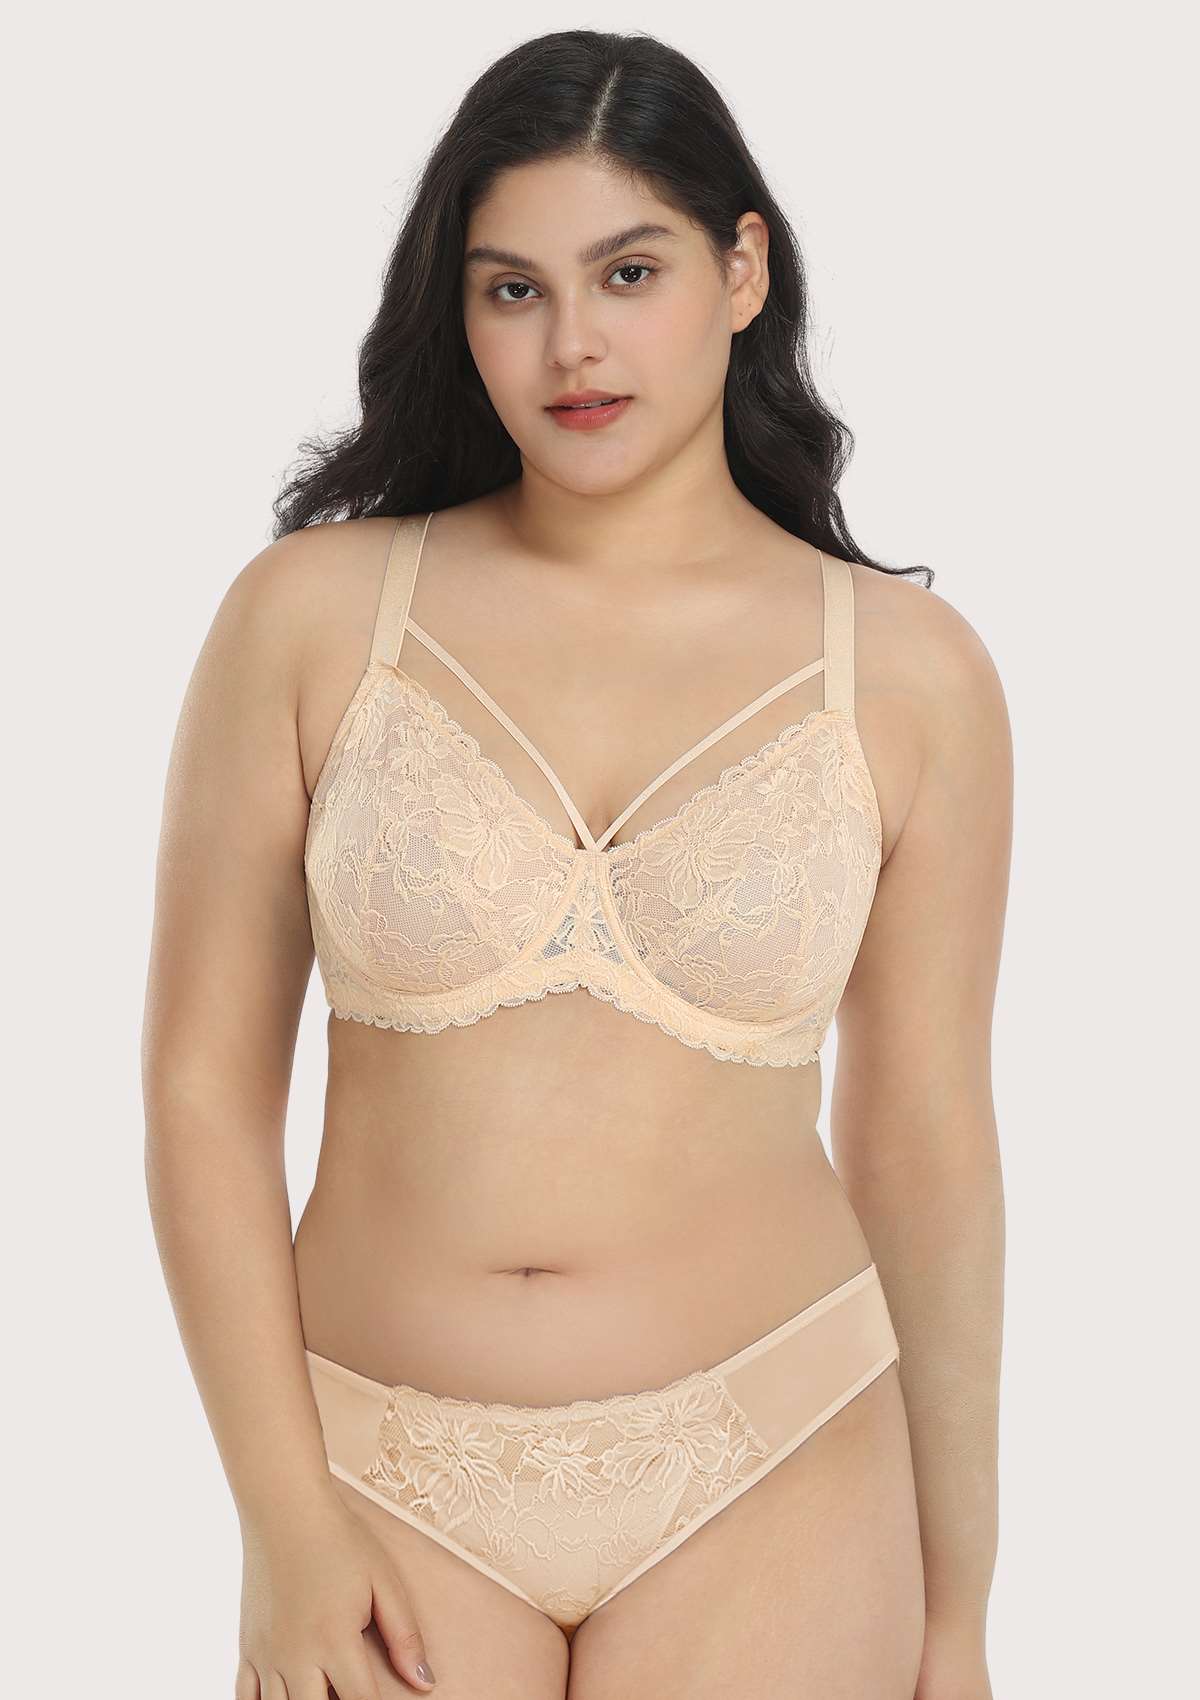 HSIA Pretty In Petals Lace Bra And Panty Set: Comfortable Support Bra - Beige Cream / 42 / D